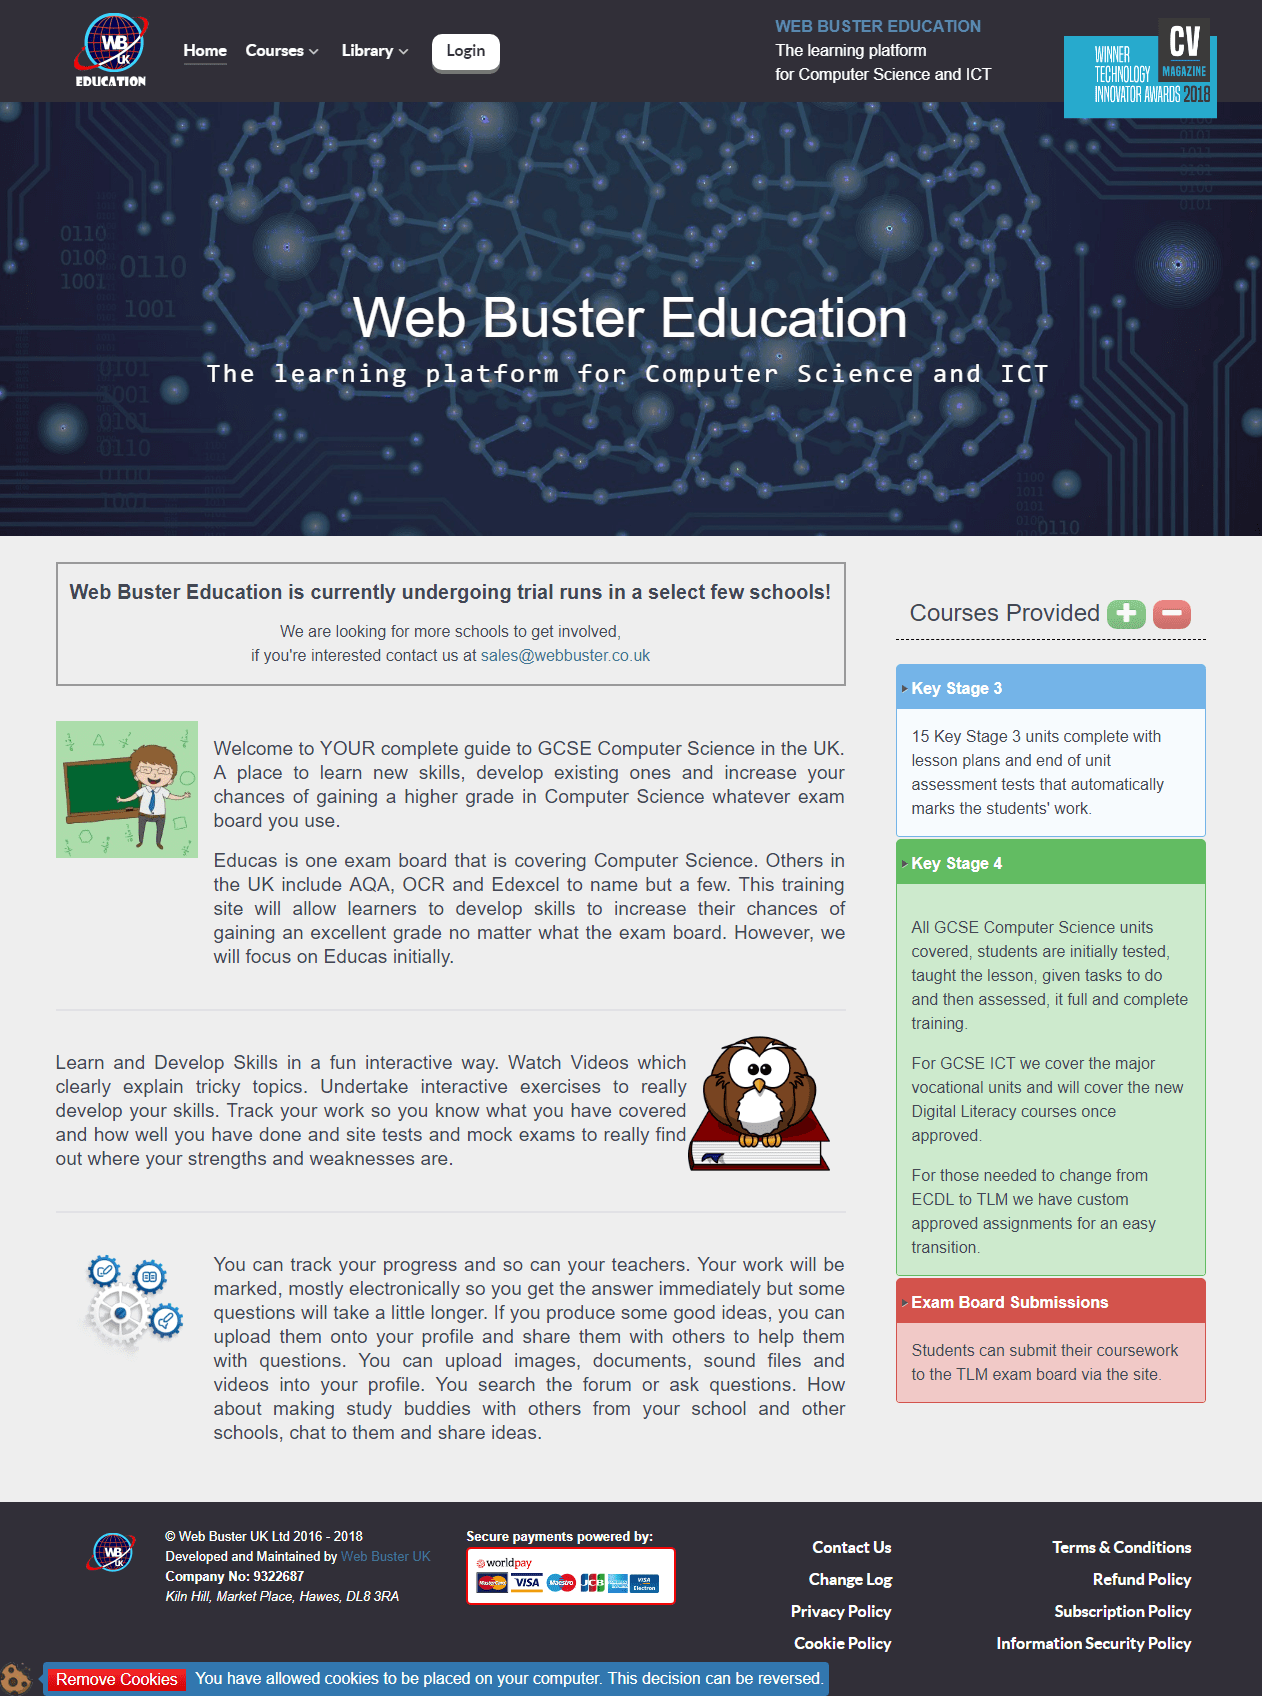 Web Buster Education